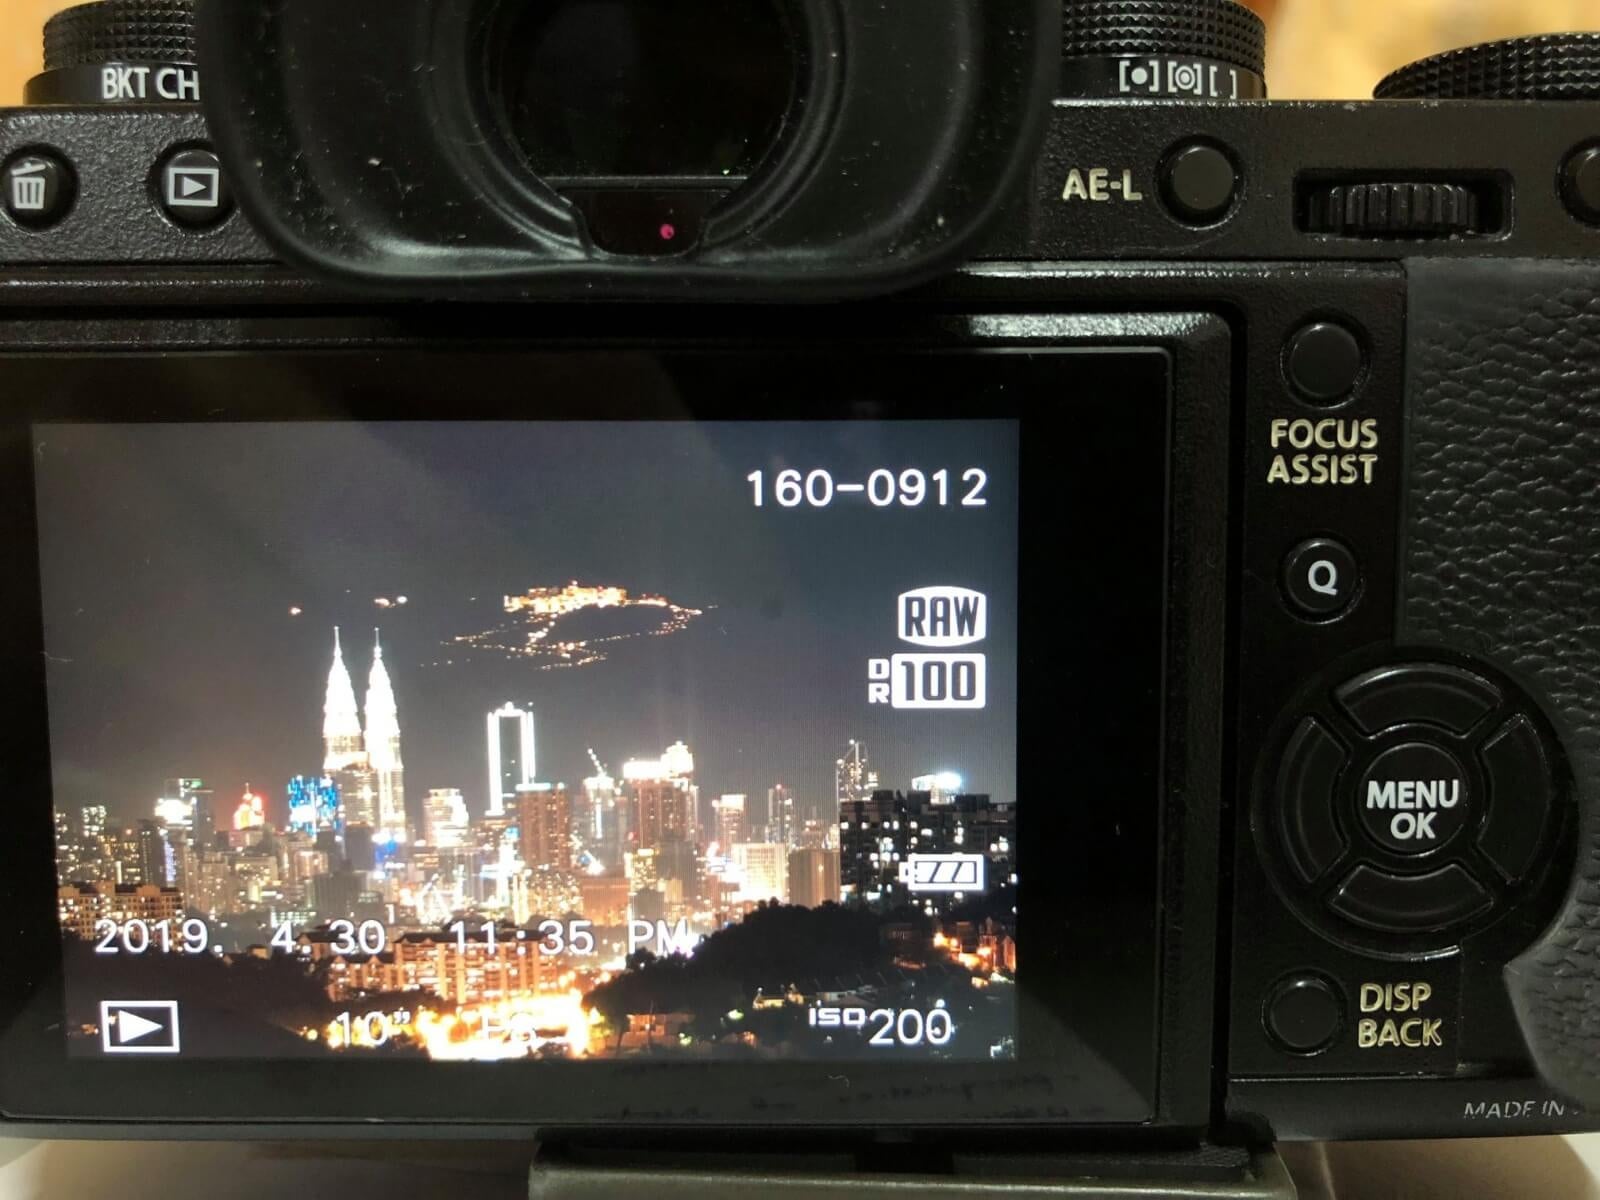 This Viral Photo Of KL & Genting May Look Fake, But It's 100% Real! - WORLD OF BUZZ